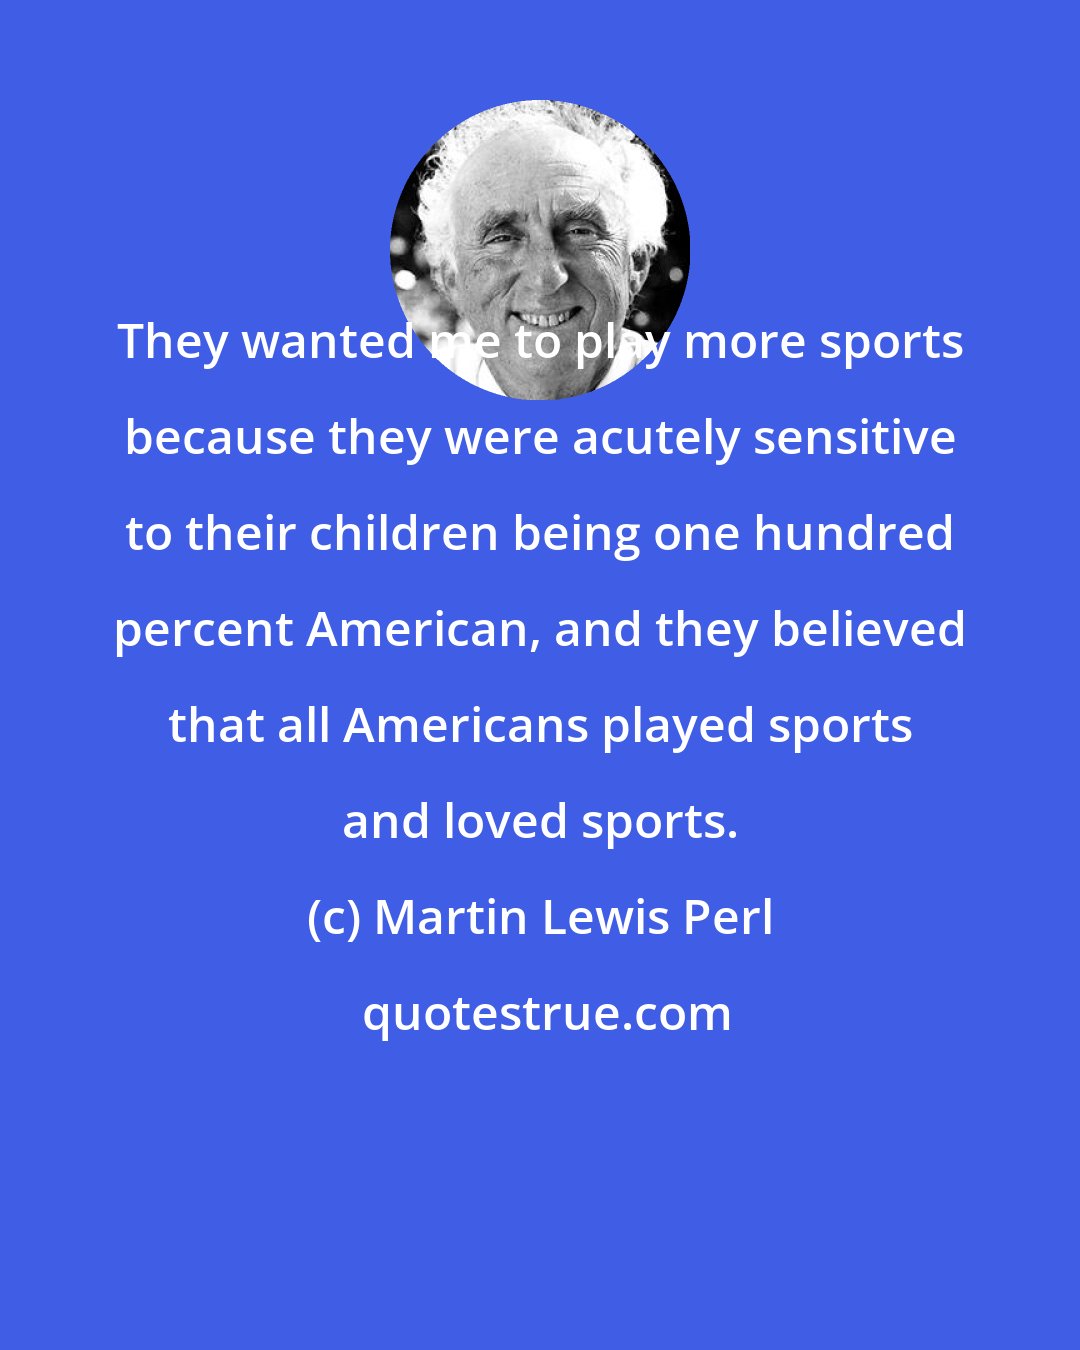 Martin Lewis Perl: They wanted me to play more sports because they were acutely sensitive to their children being one hundred percent American, and they believed that all Americans played sports and loved sports.